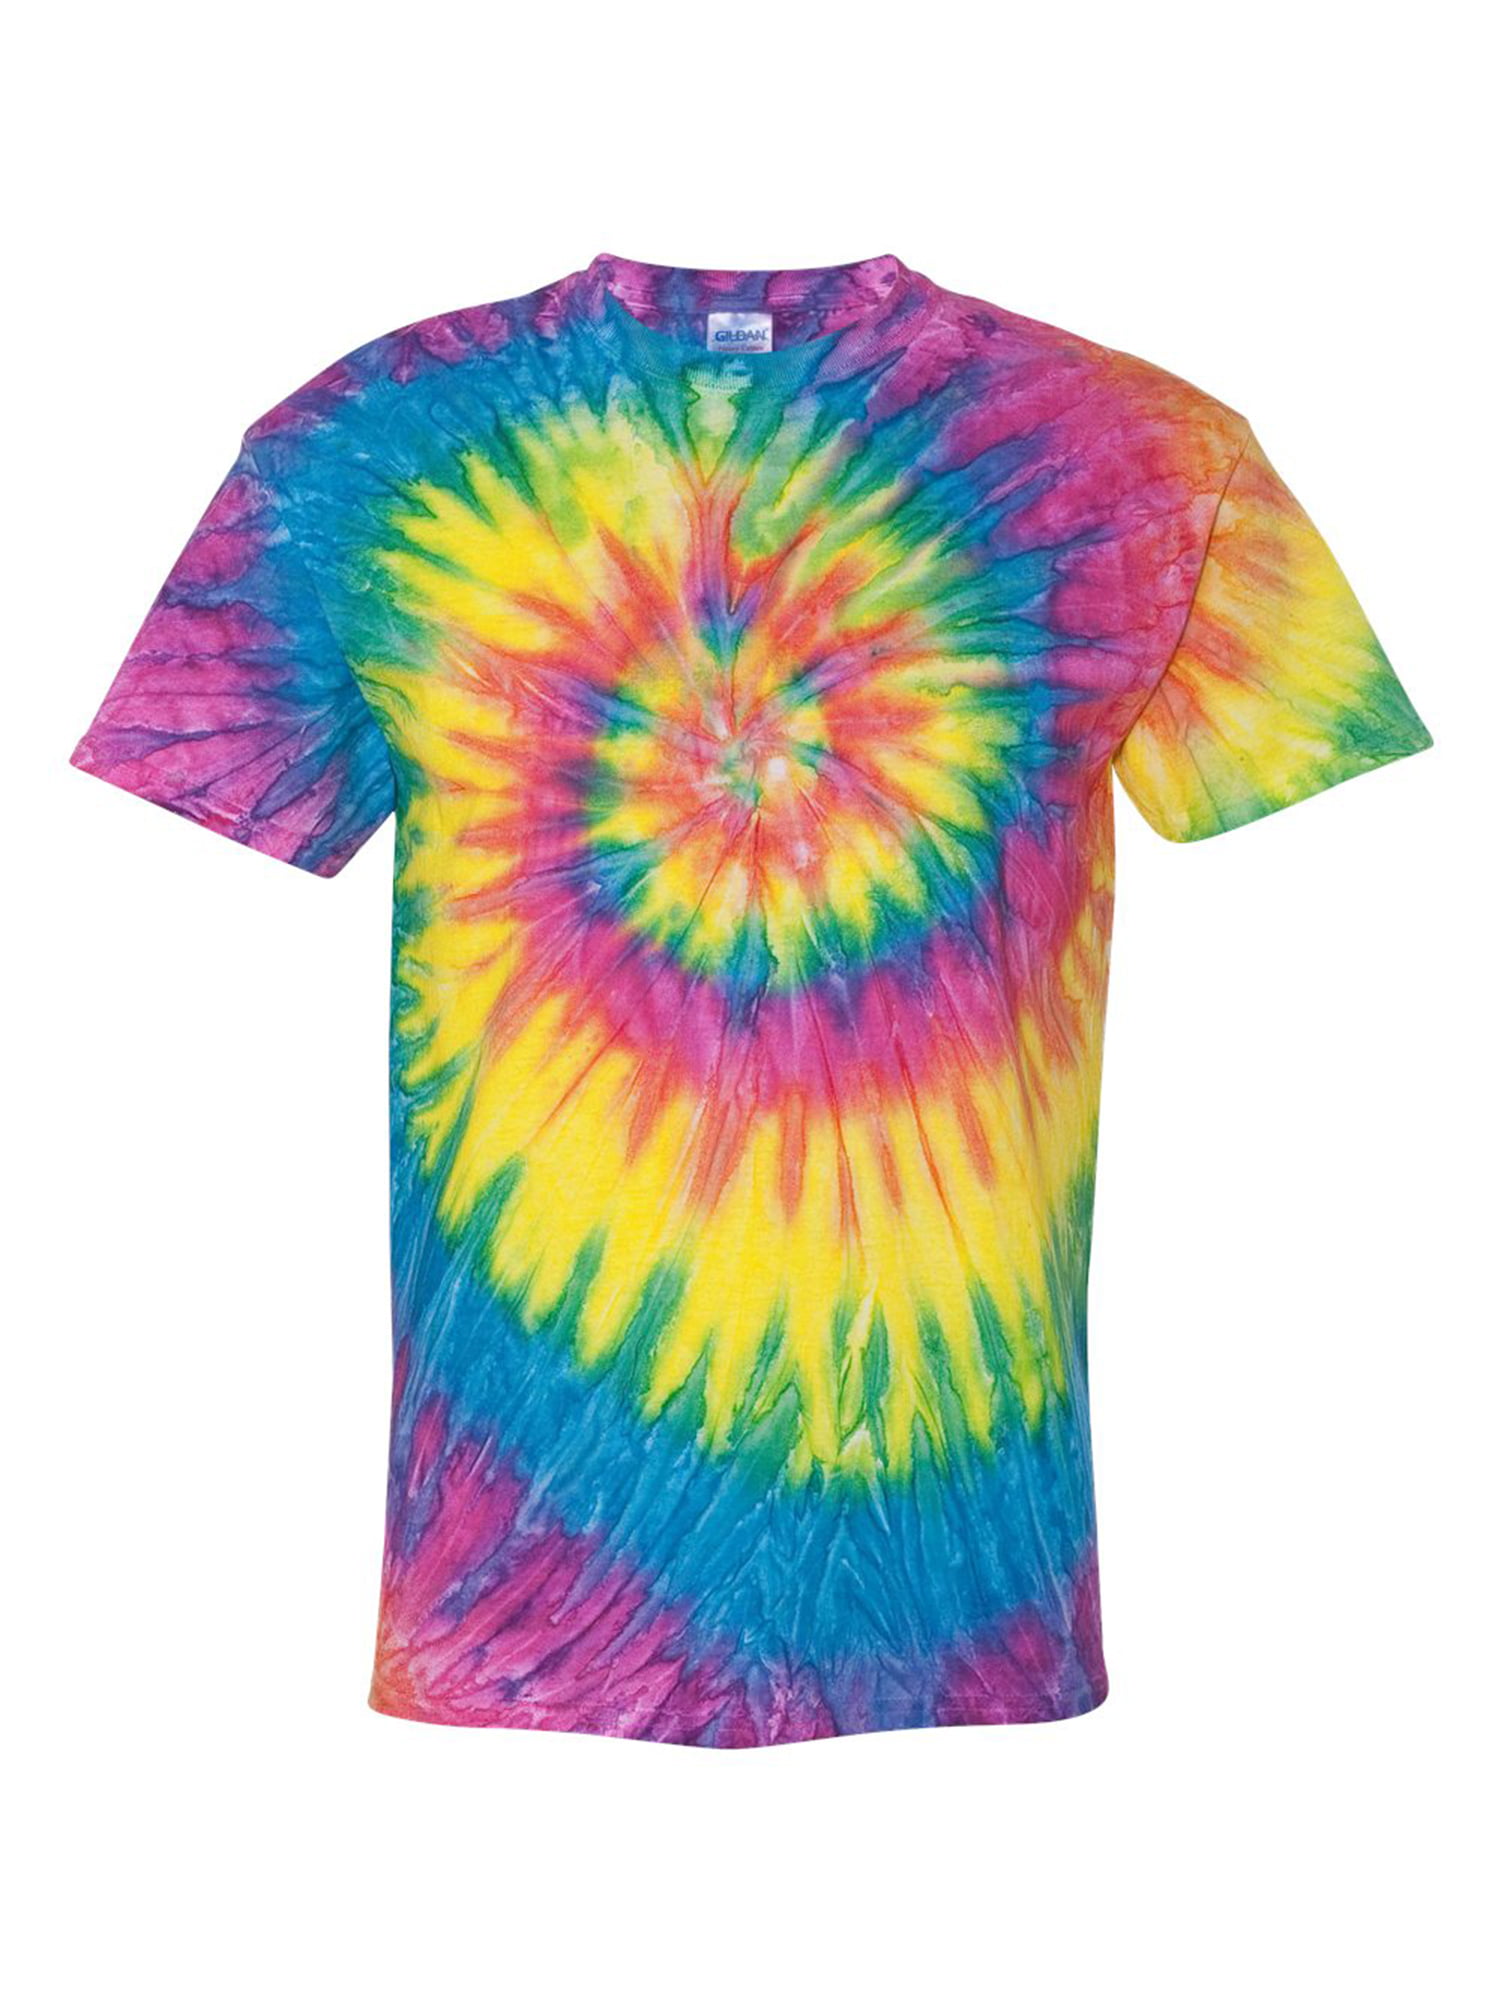 projector prevent Crete Dyenomite Tie Dyed Shirt for Her Womens Hippie Tshirt Multi-Color Spiral Tie -Dye T-Shirts for Women Boho Tee Rainbow Psychedelic T-Shirt - Walmart.com